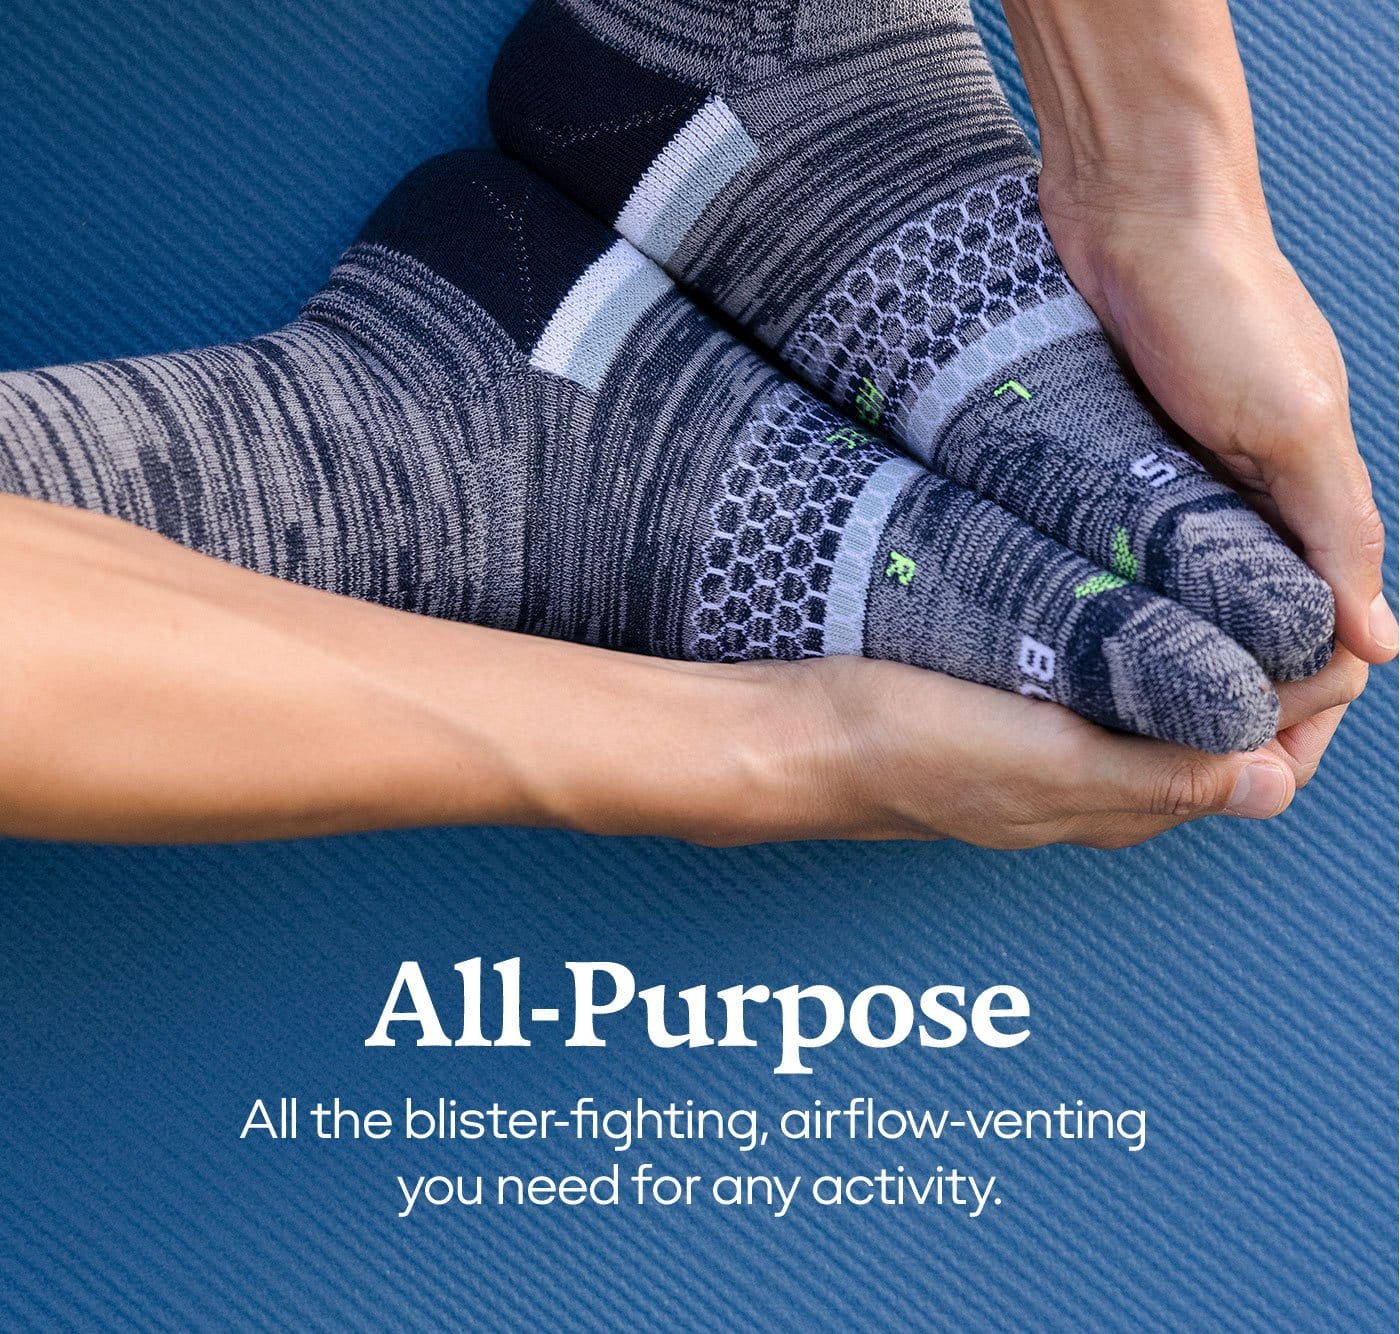 All-Purpose | All the blister-fighting, airflow-venting you need for any activity.